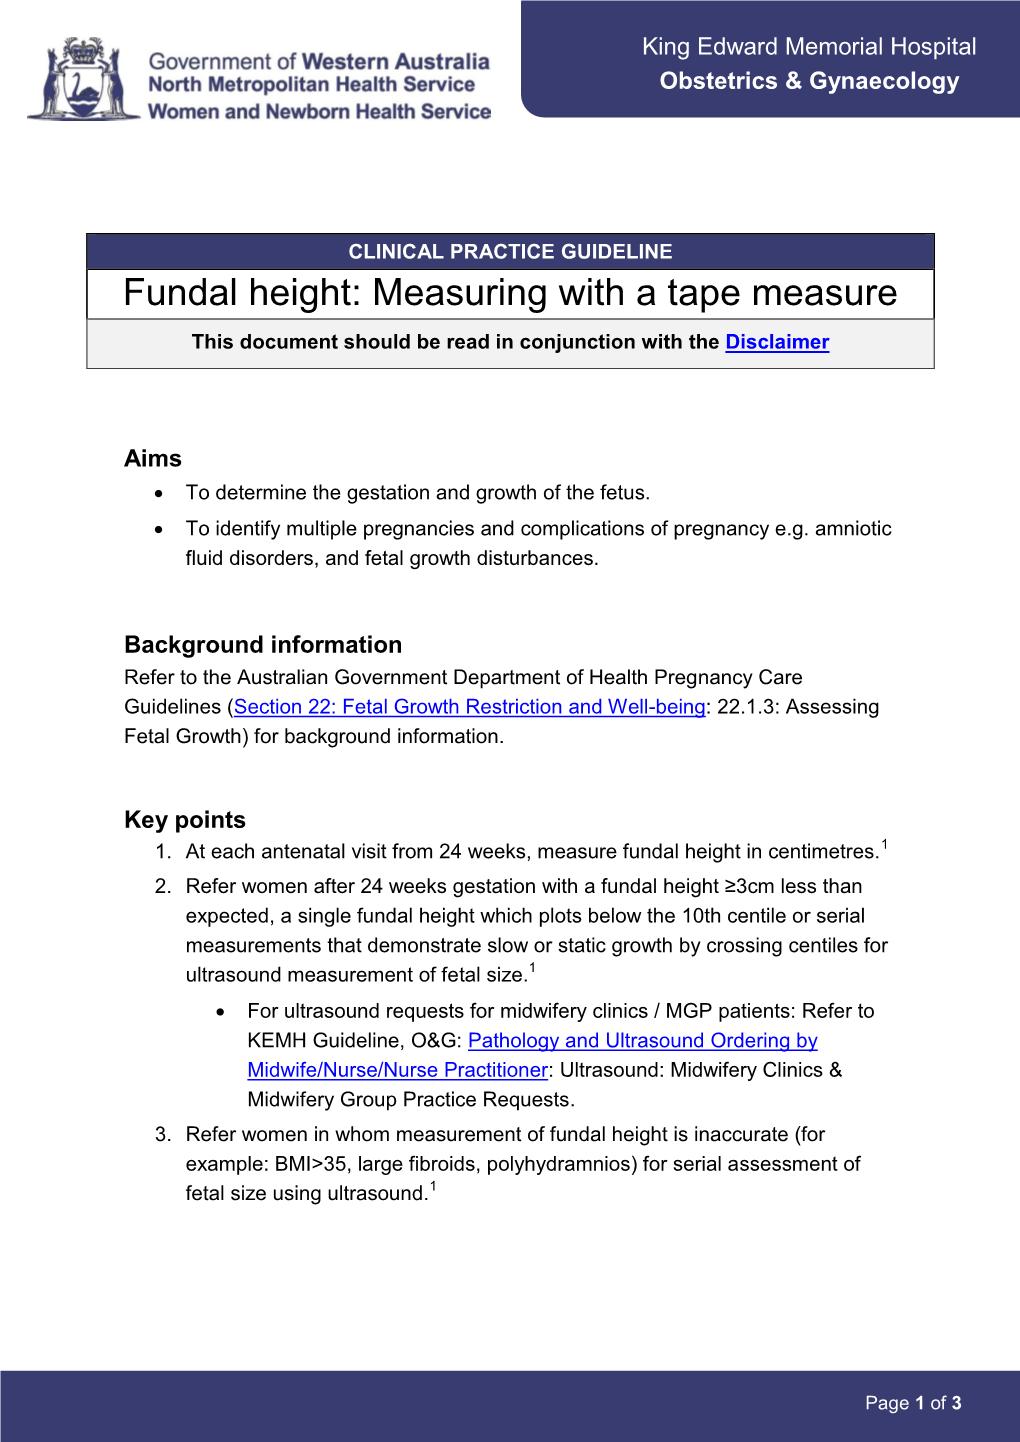 Fundal Height Measuring with a Tape Measure